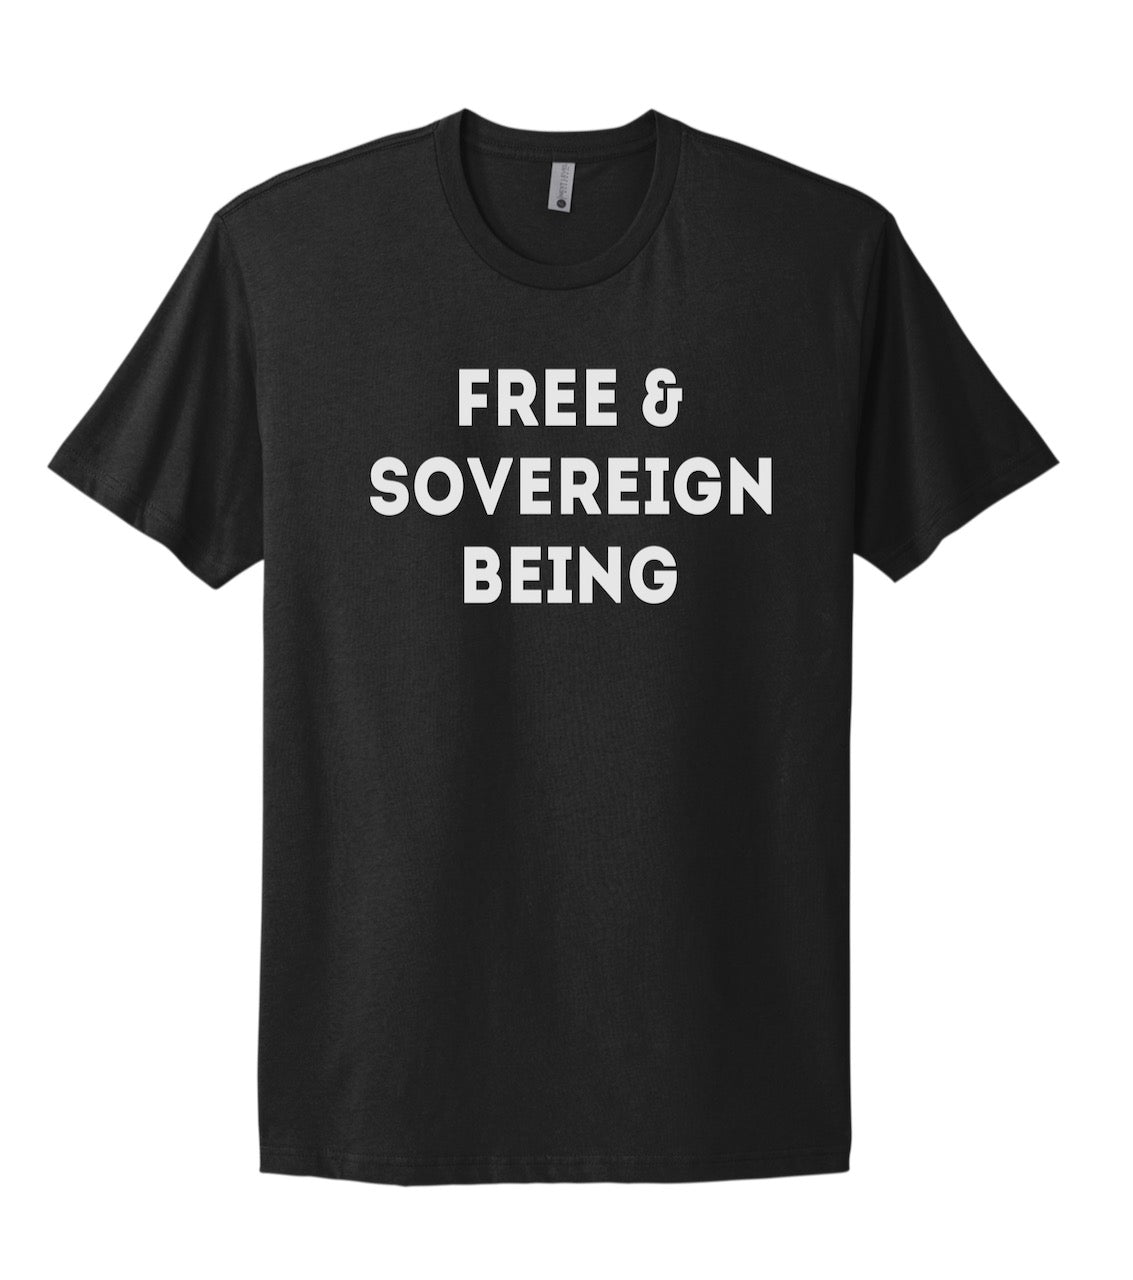 FREE & SOVEREIGN BEING t-shirt